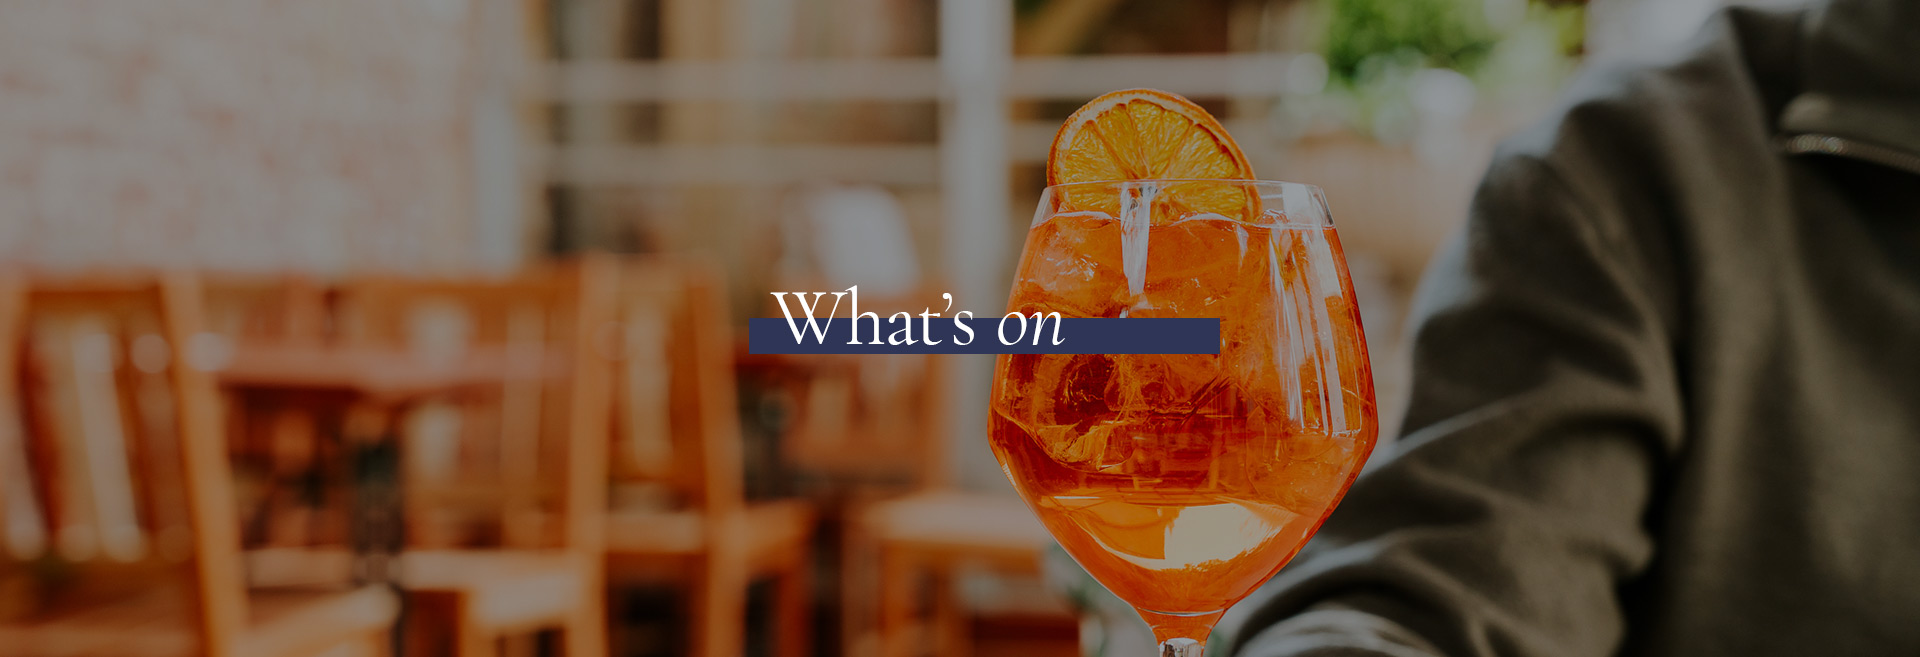 What's On at The Prince Regent